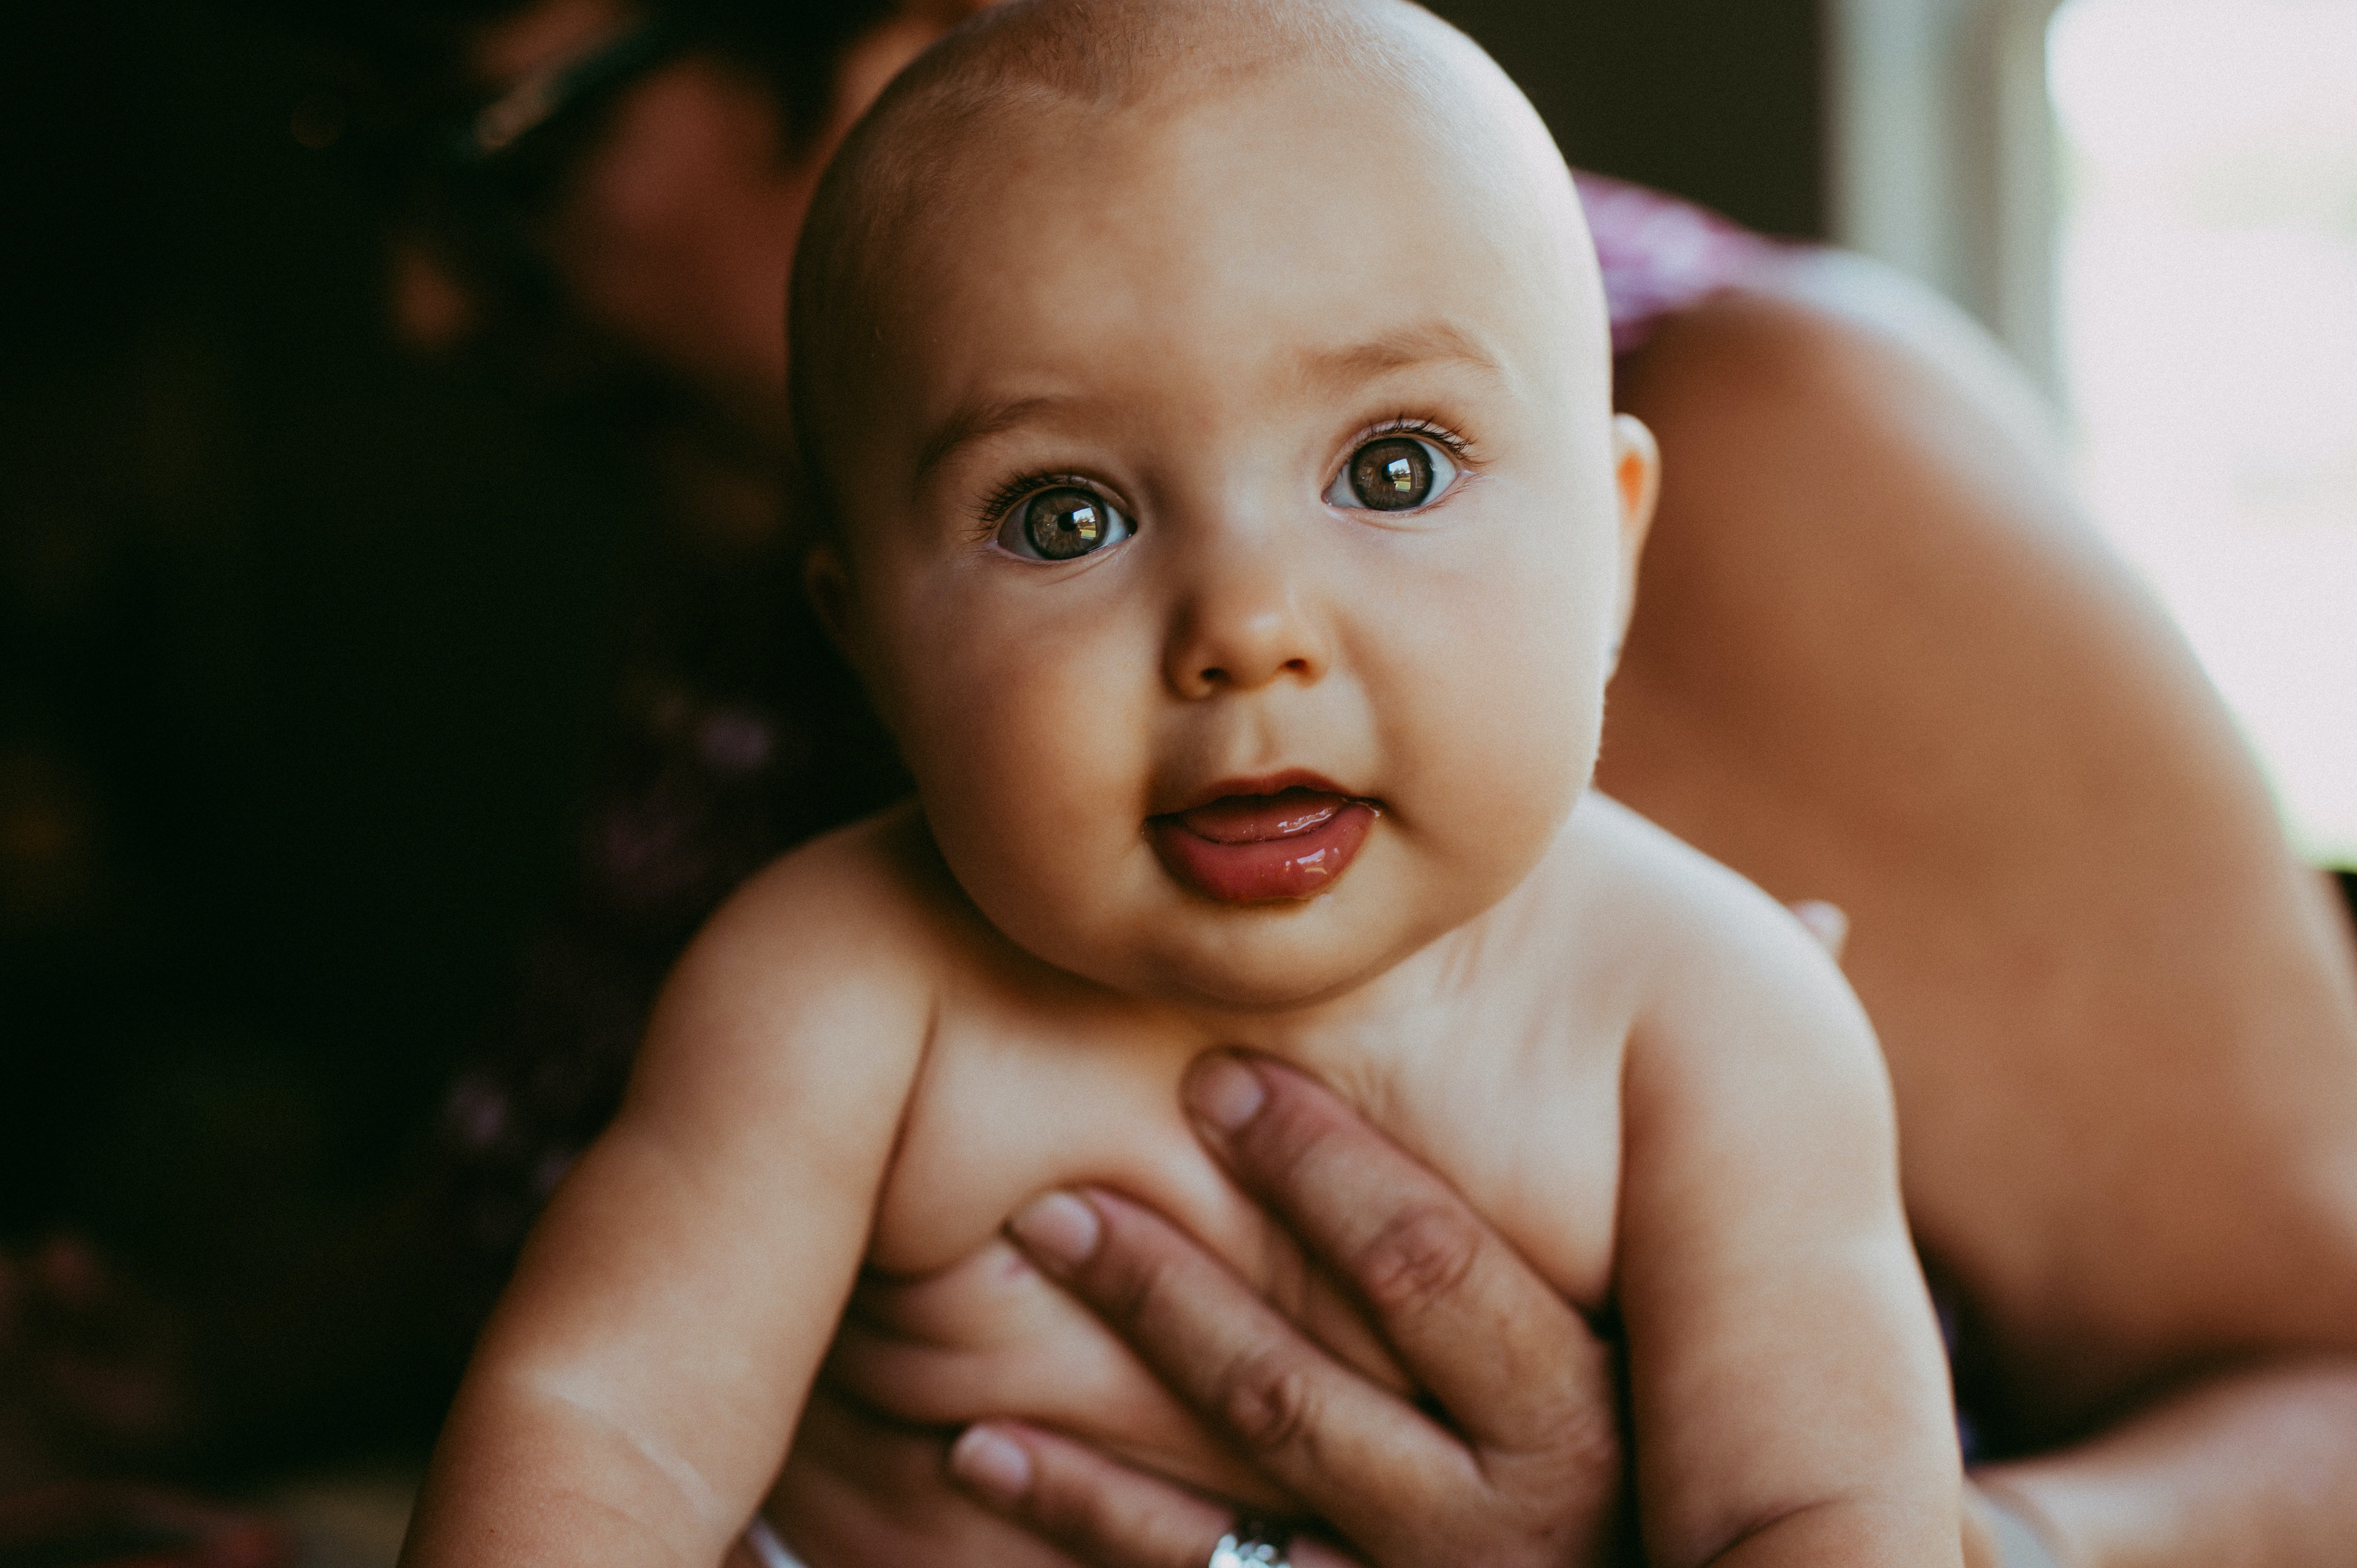 Older woman holding baby. | Source: Pexels